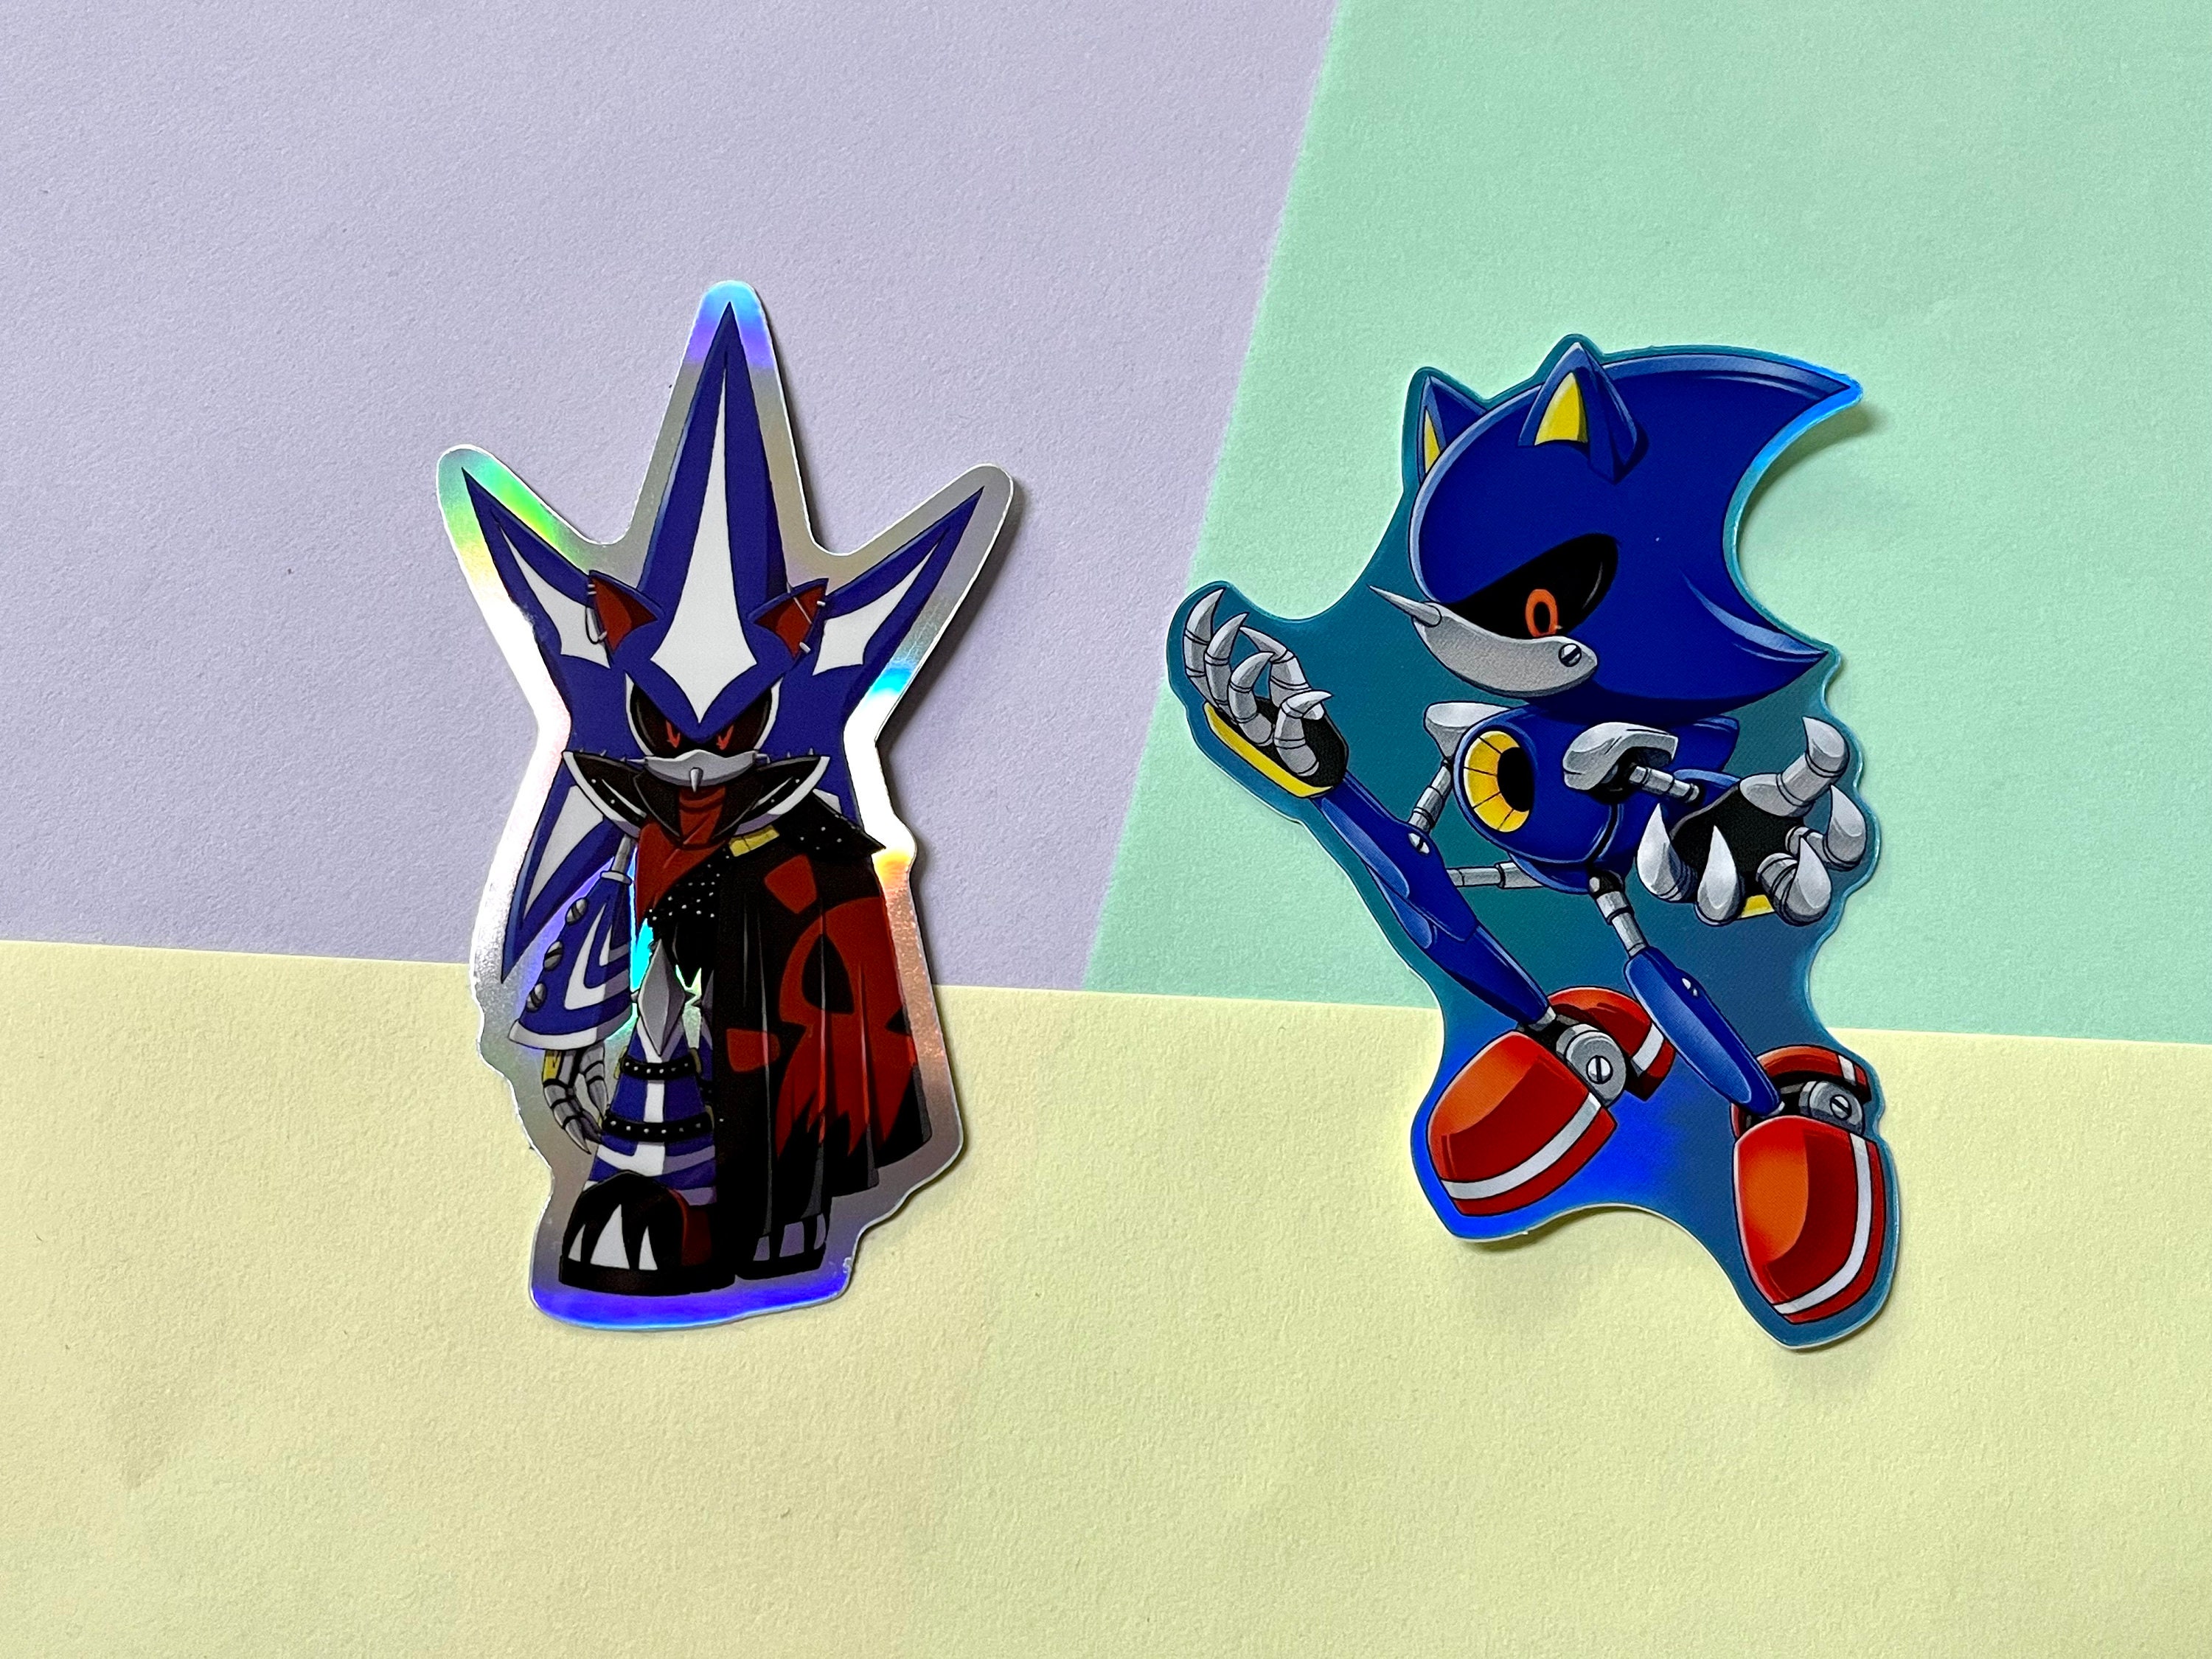 Metal Sonic icon Sticker for Sale by DanielCostaart